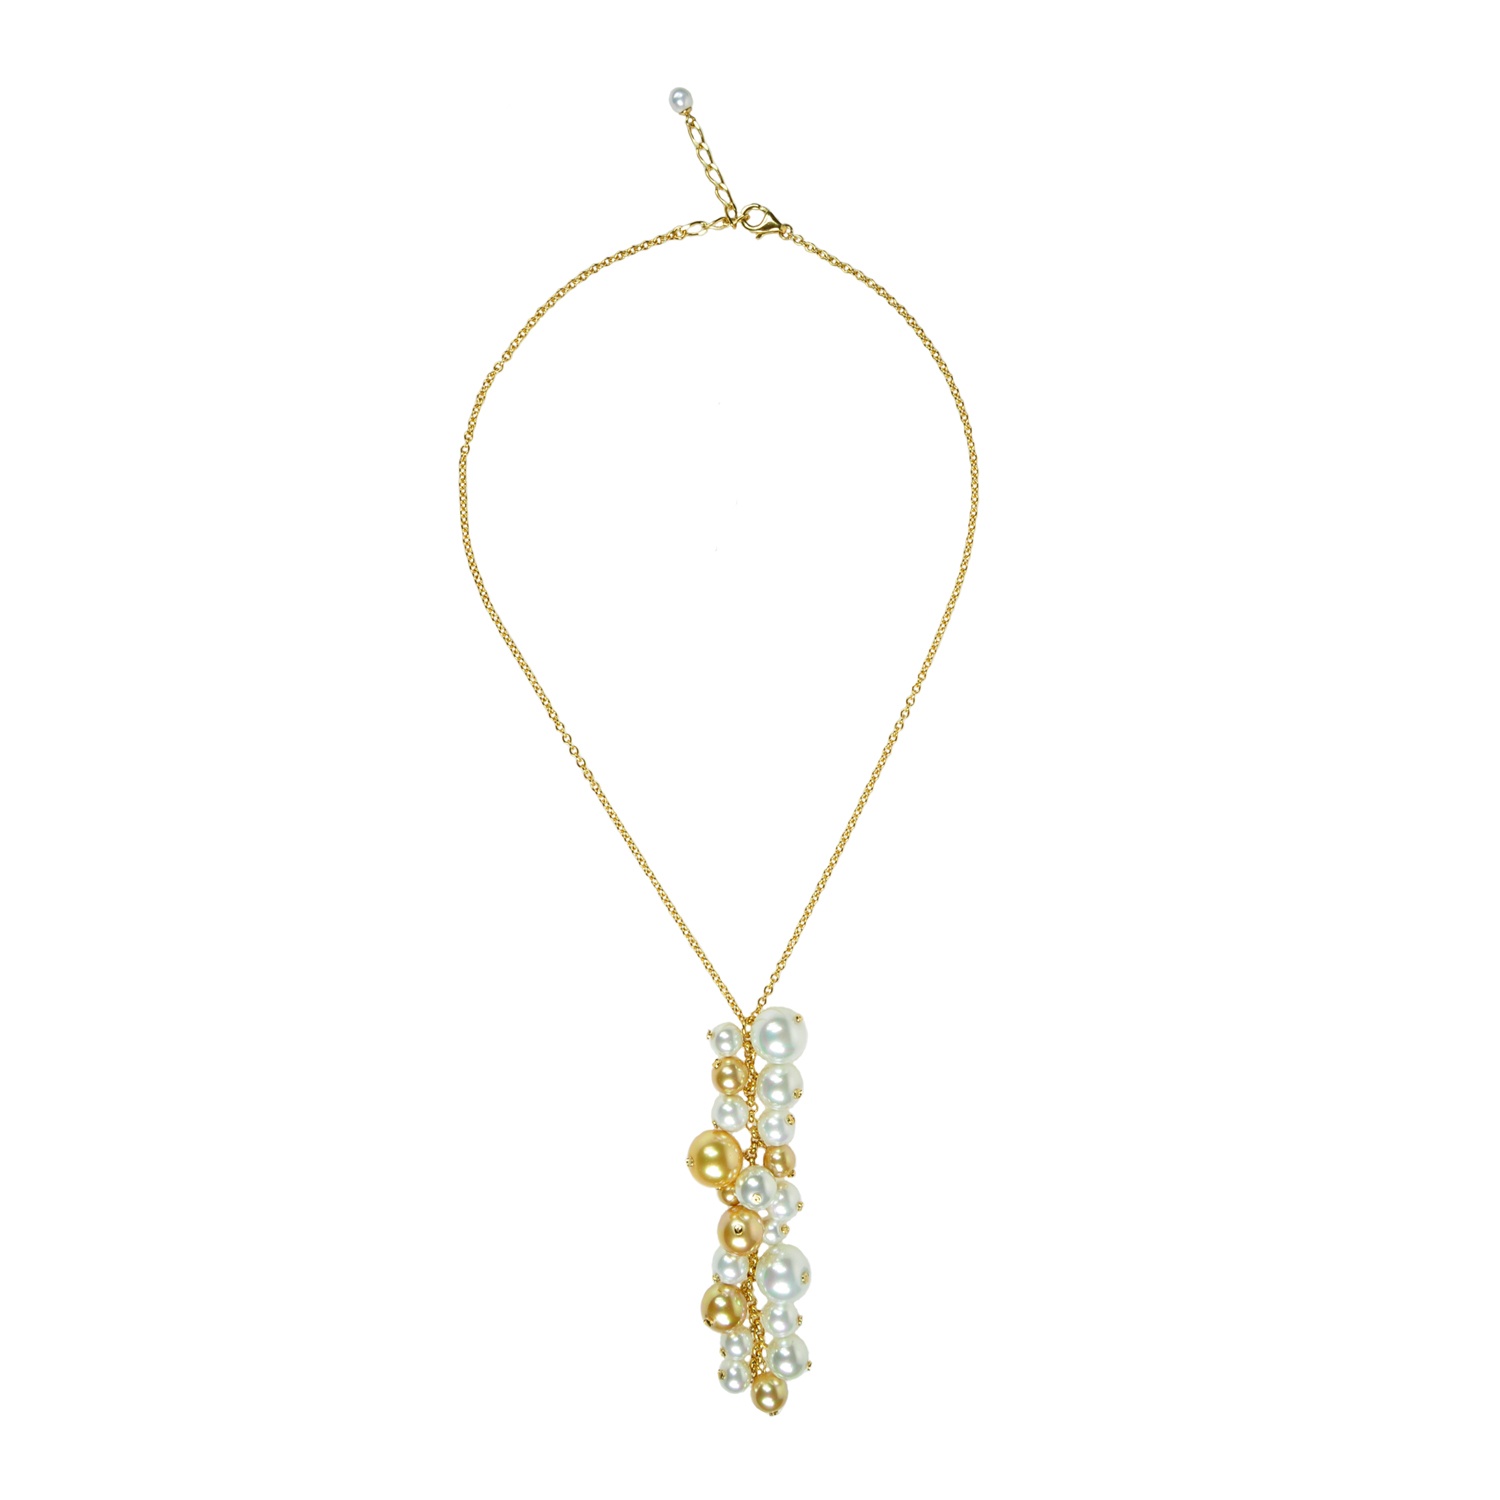 Necklace with a pendant in a cascade of pearls in golden tones